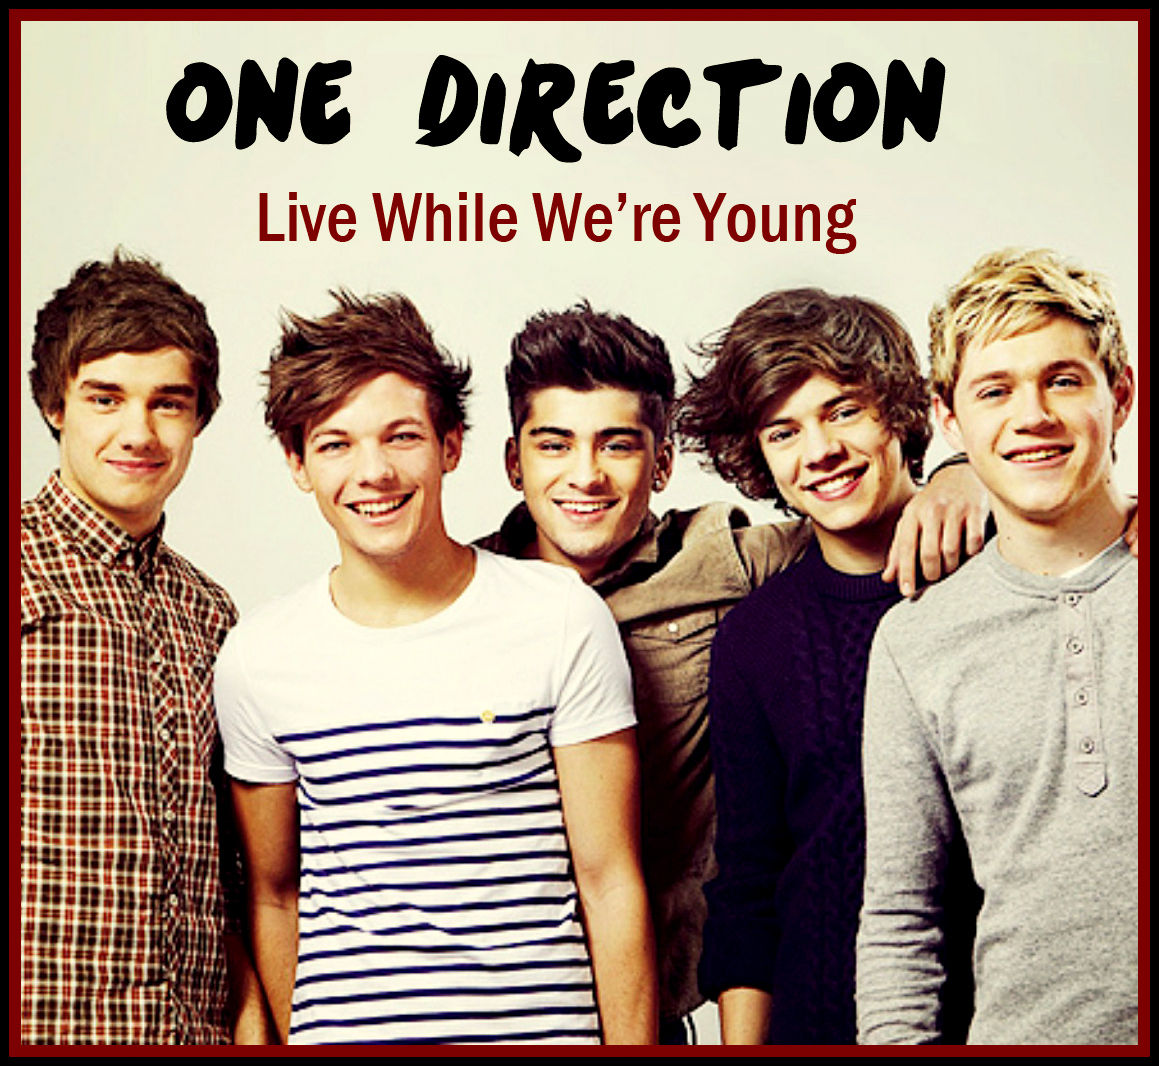 Live While We Re Young Onedirection のんびり和訳